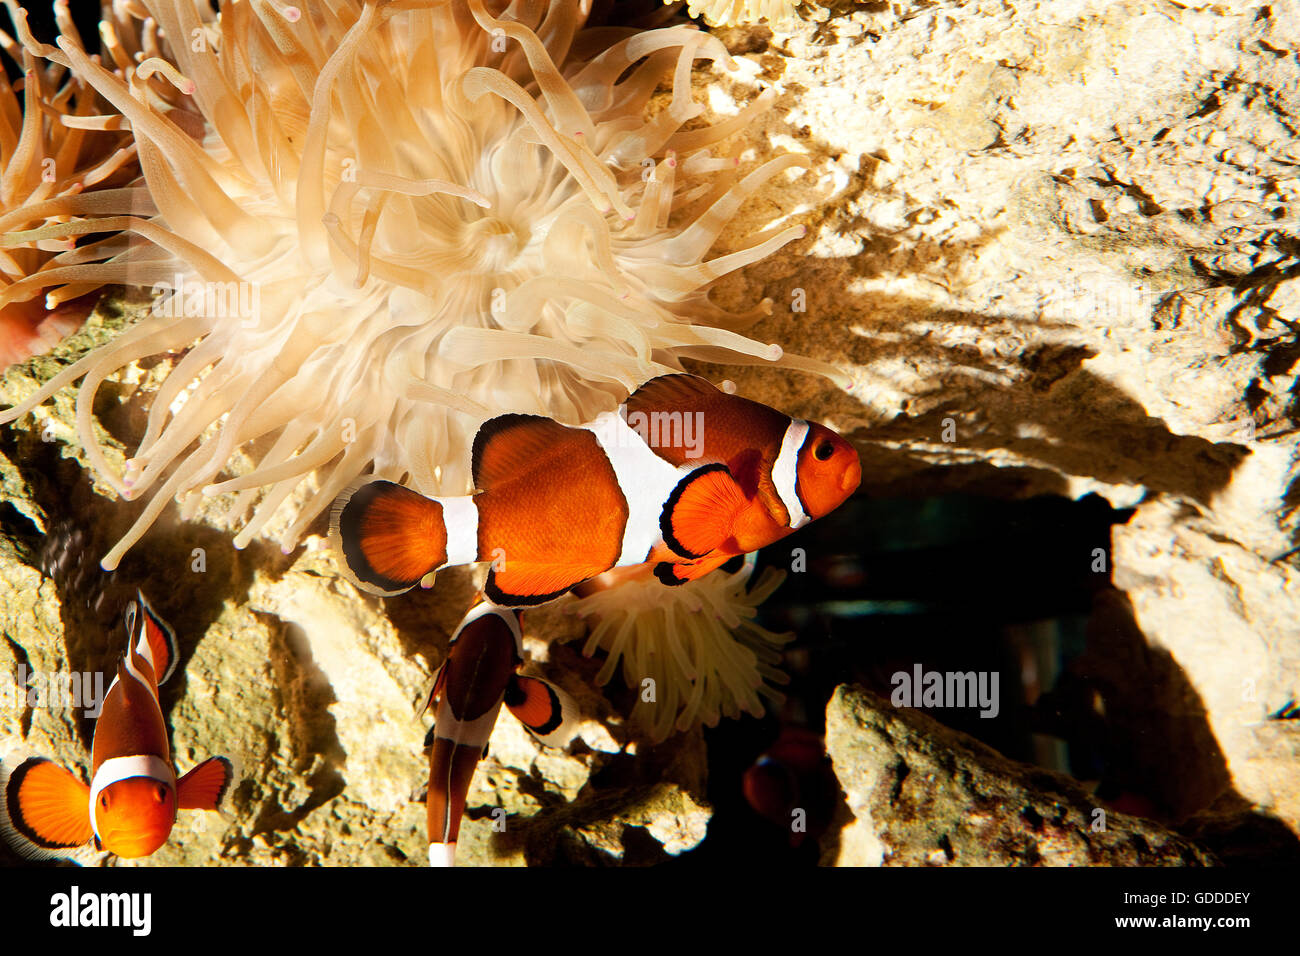 Ocellaris Clowfish, amphiprion ocellaris, Group standing near Anemone, South Africa Stock Photo